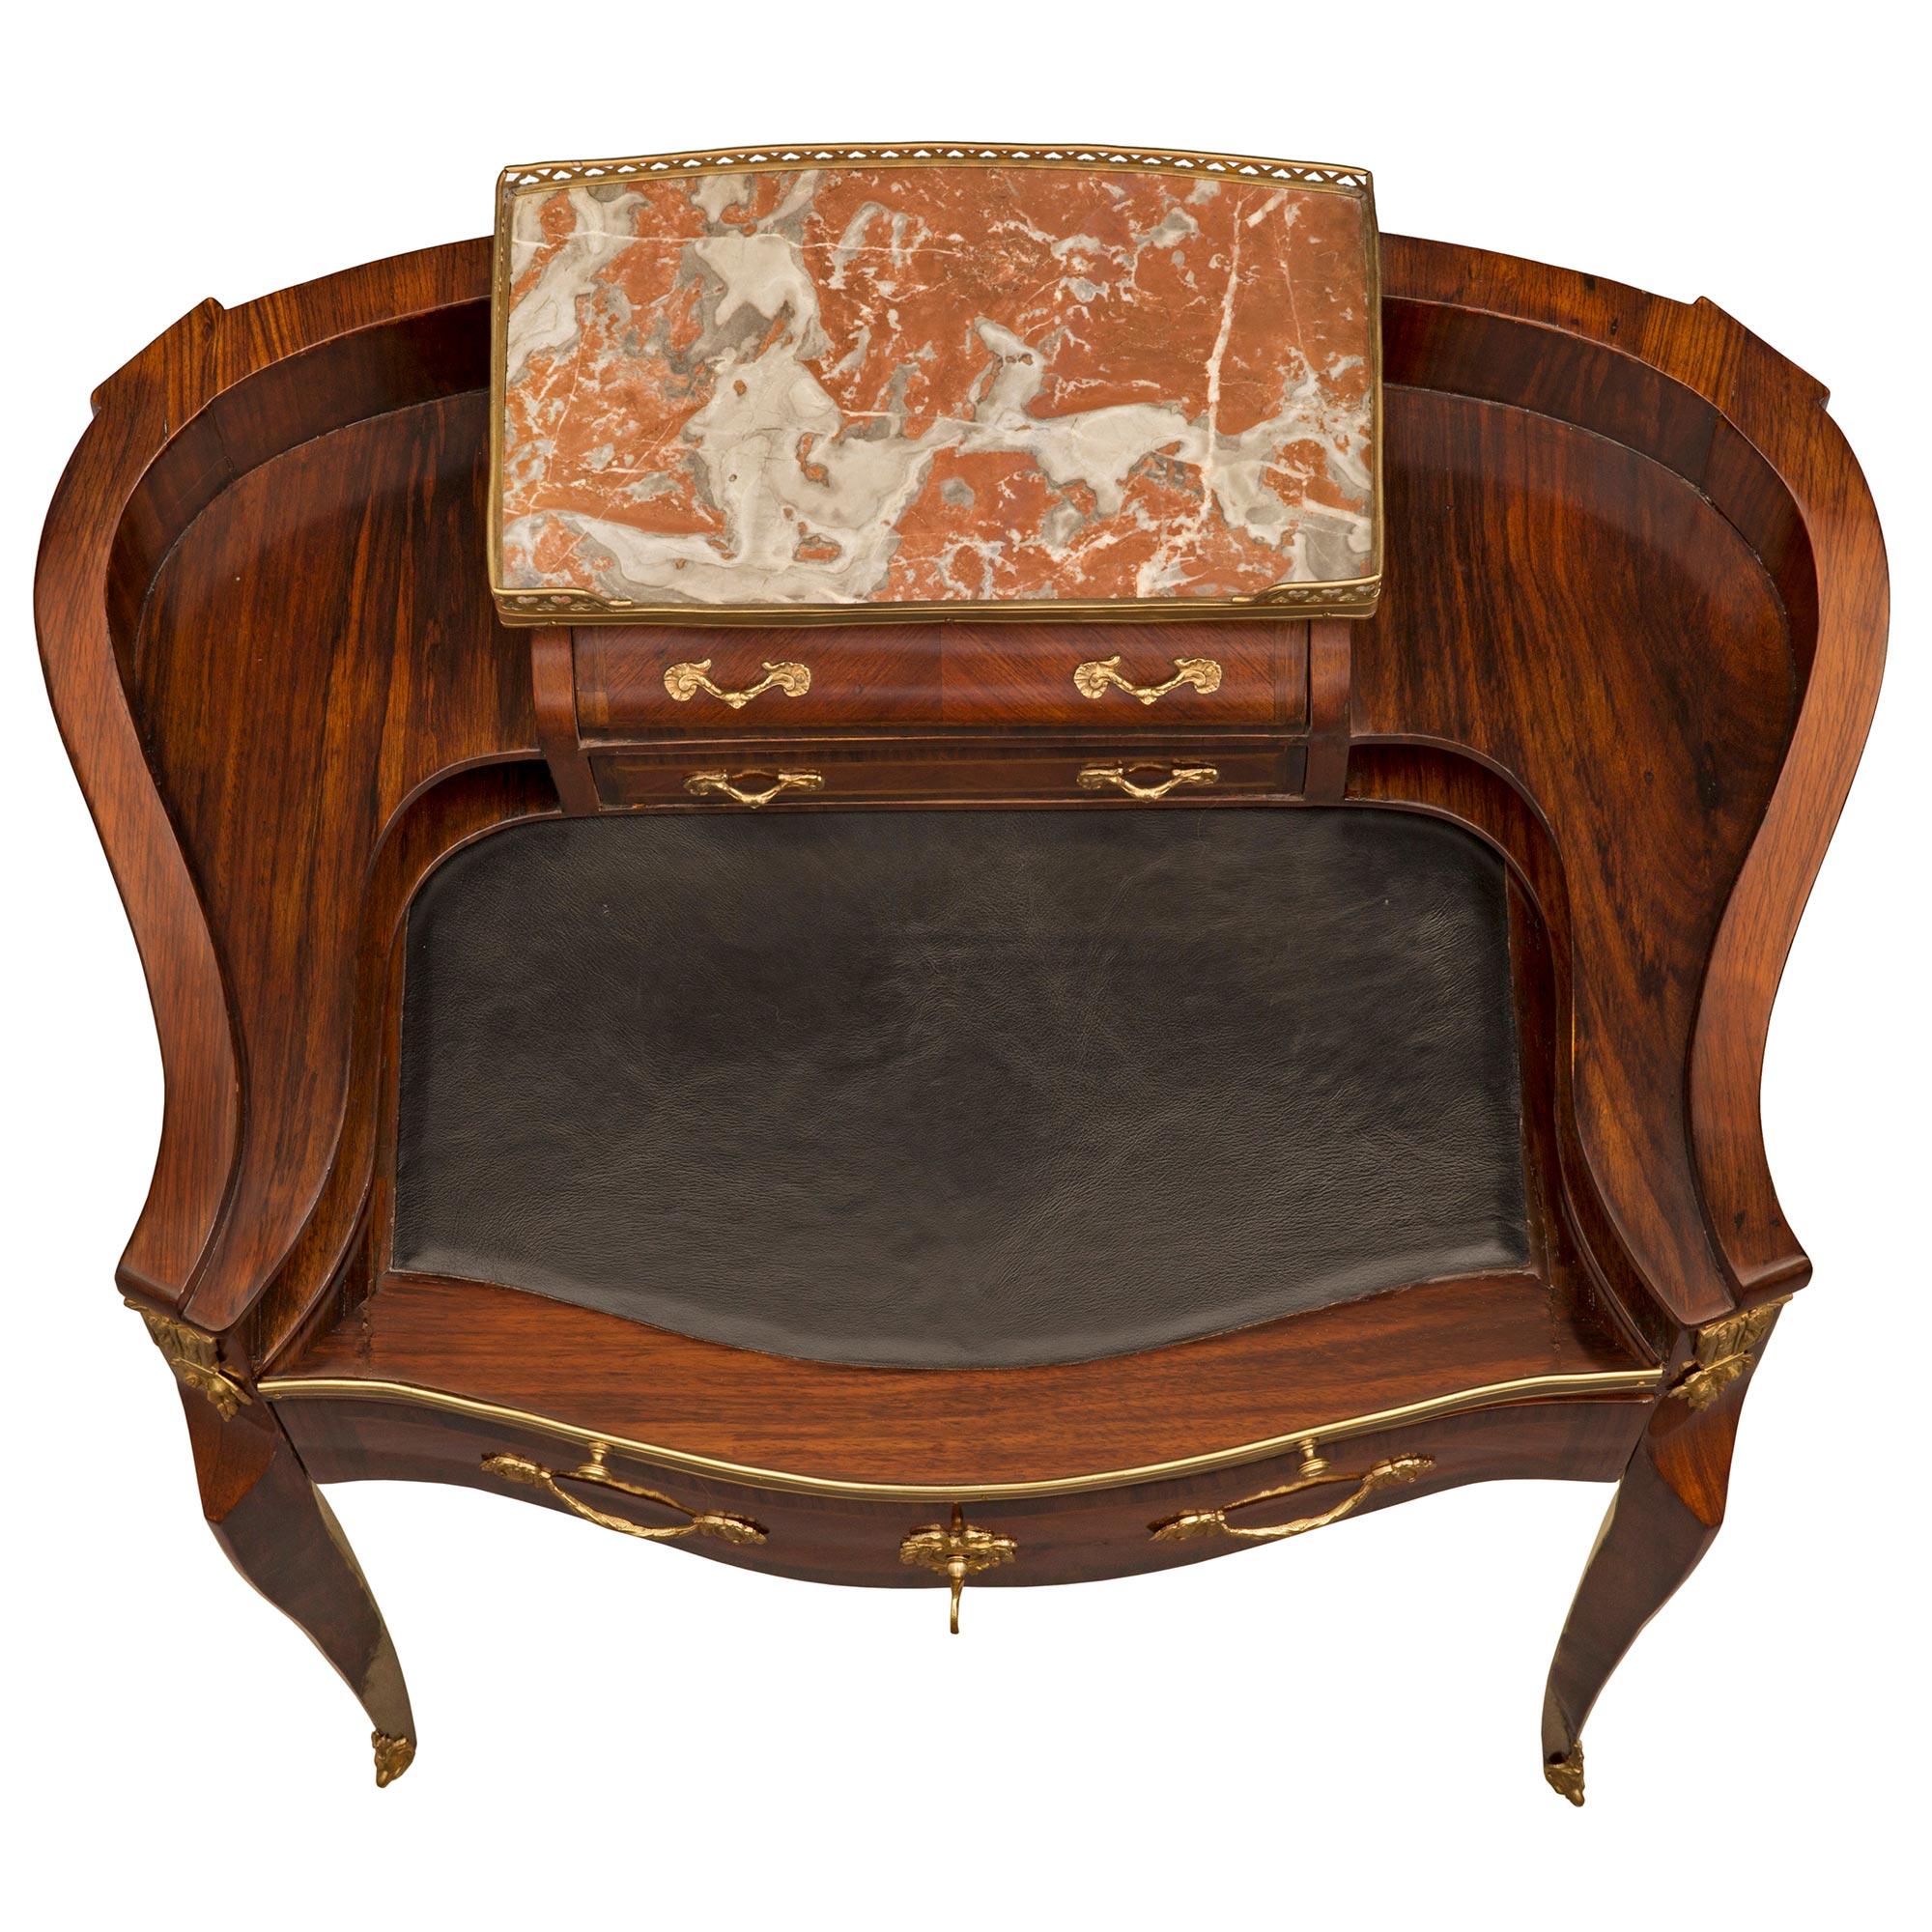 An elegant French 19th century Louis XV st. Rosewood, Kingwood, Tulipwood, ormolu, and Incarnat Turquin marble desk. The three drawer desk is raised by slender cabriole legs with fine foliate ormolu sabots. The bombee scallop shaped apron displays